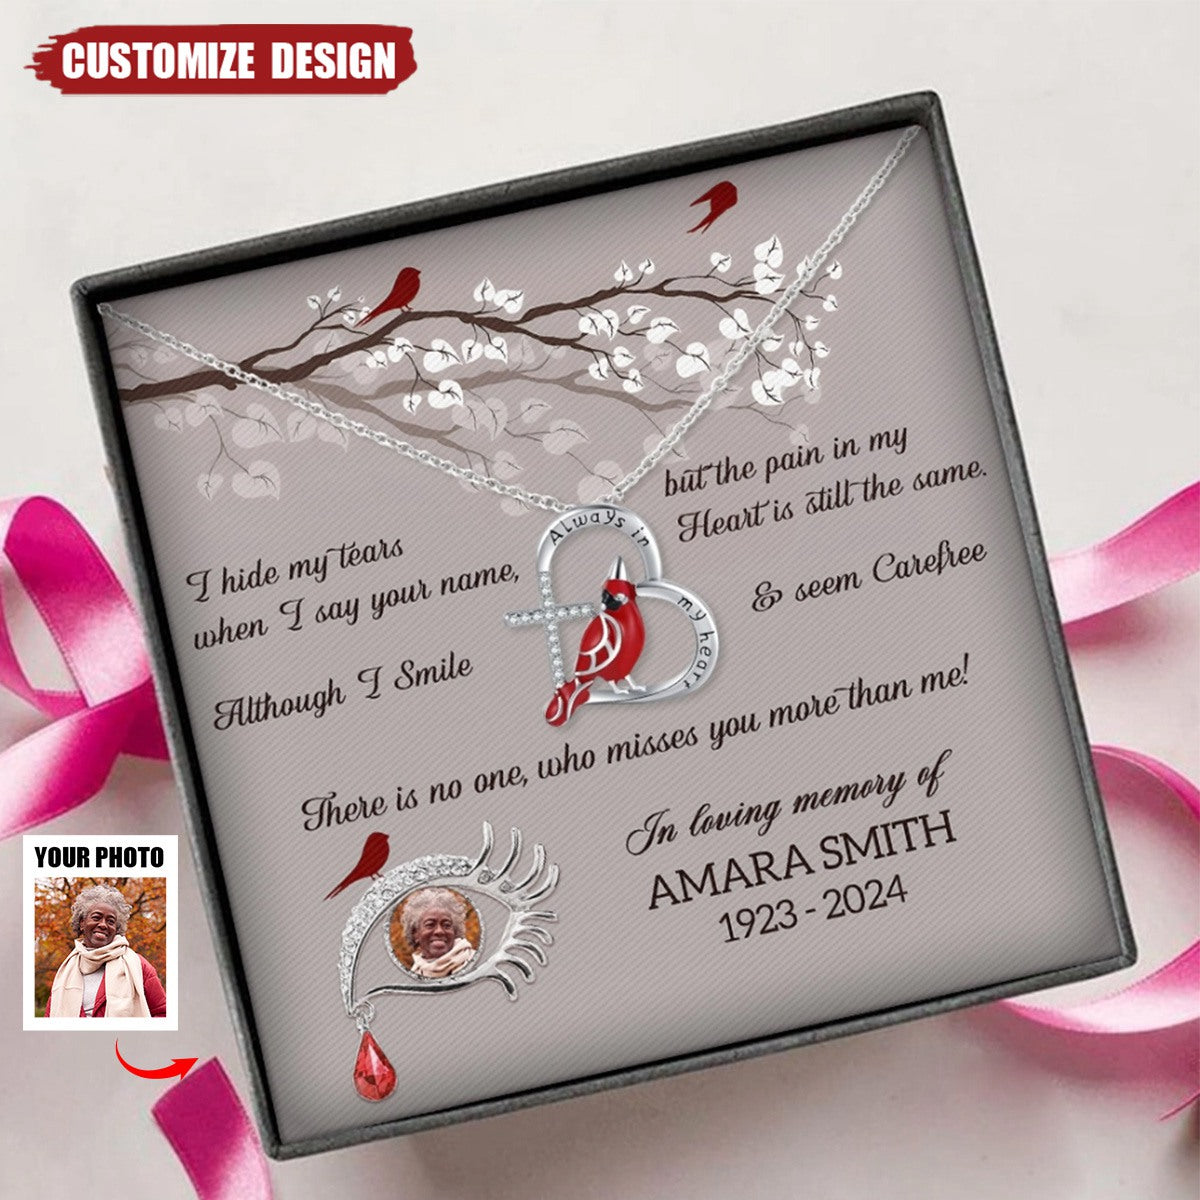 There Is No One Who Misses You More Than Me - Personalized Cardinal Message Card Necklace - Memorial Gift For Family Members